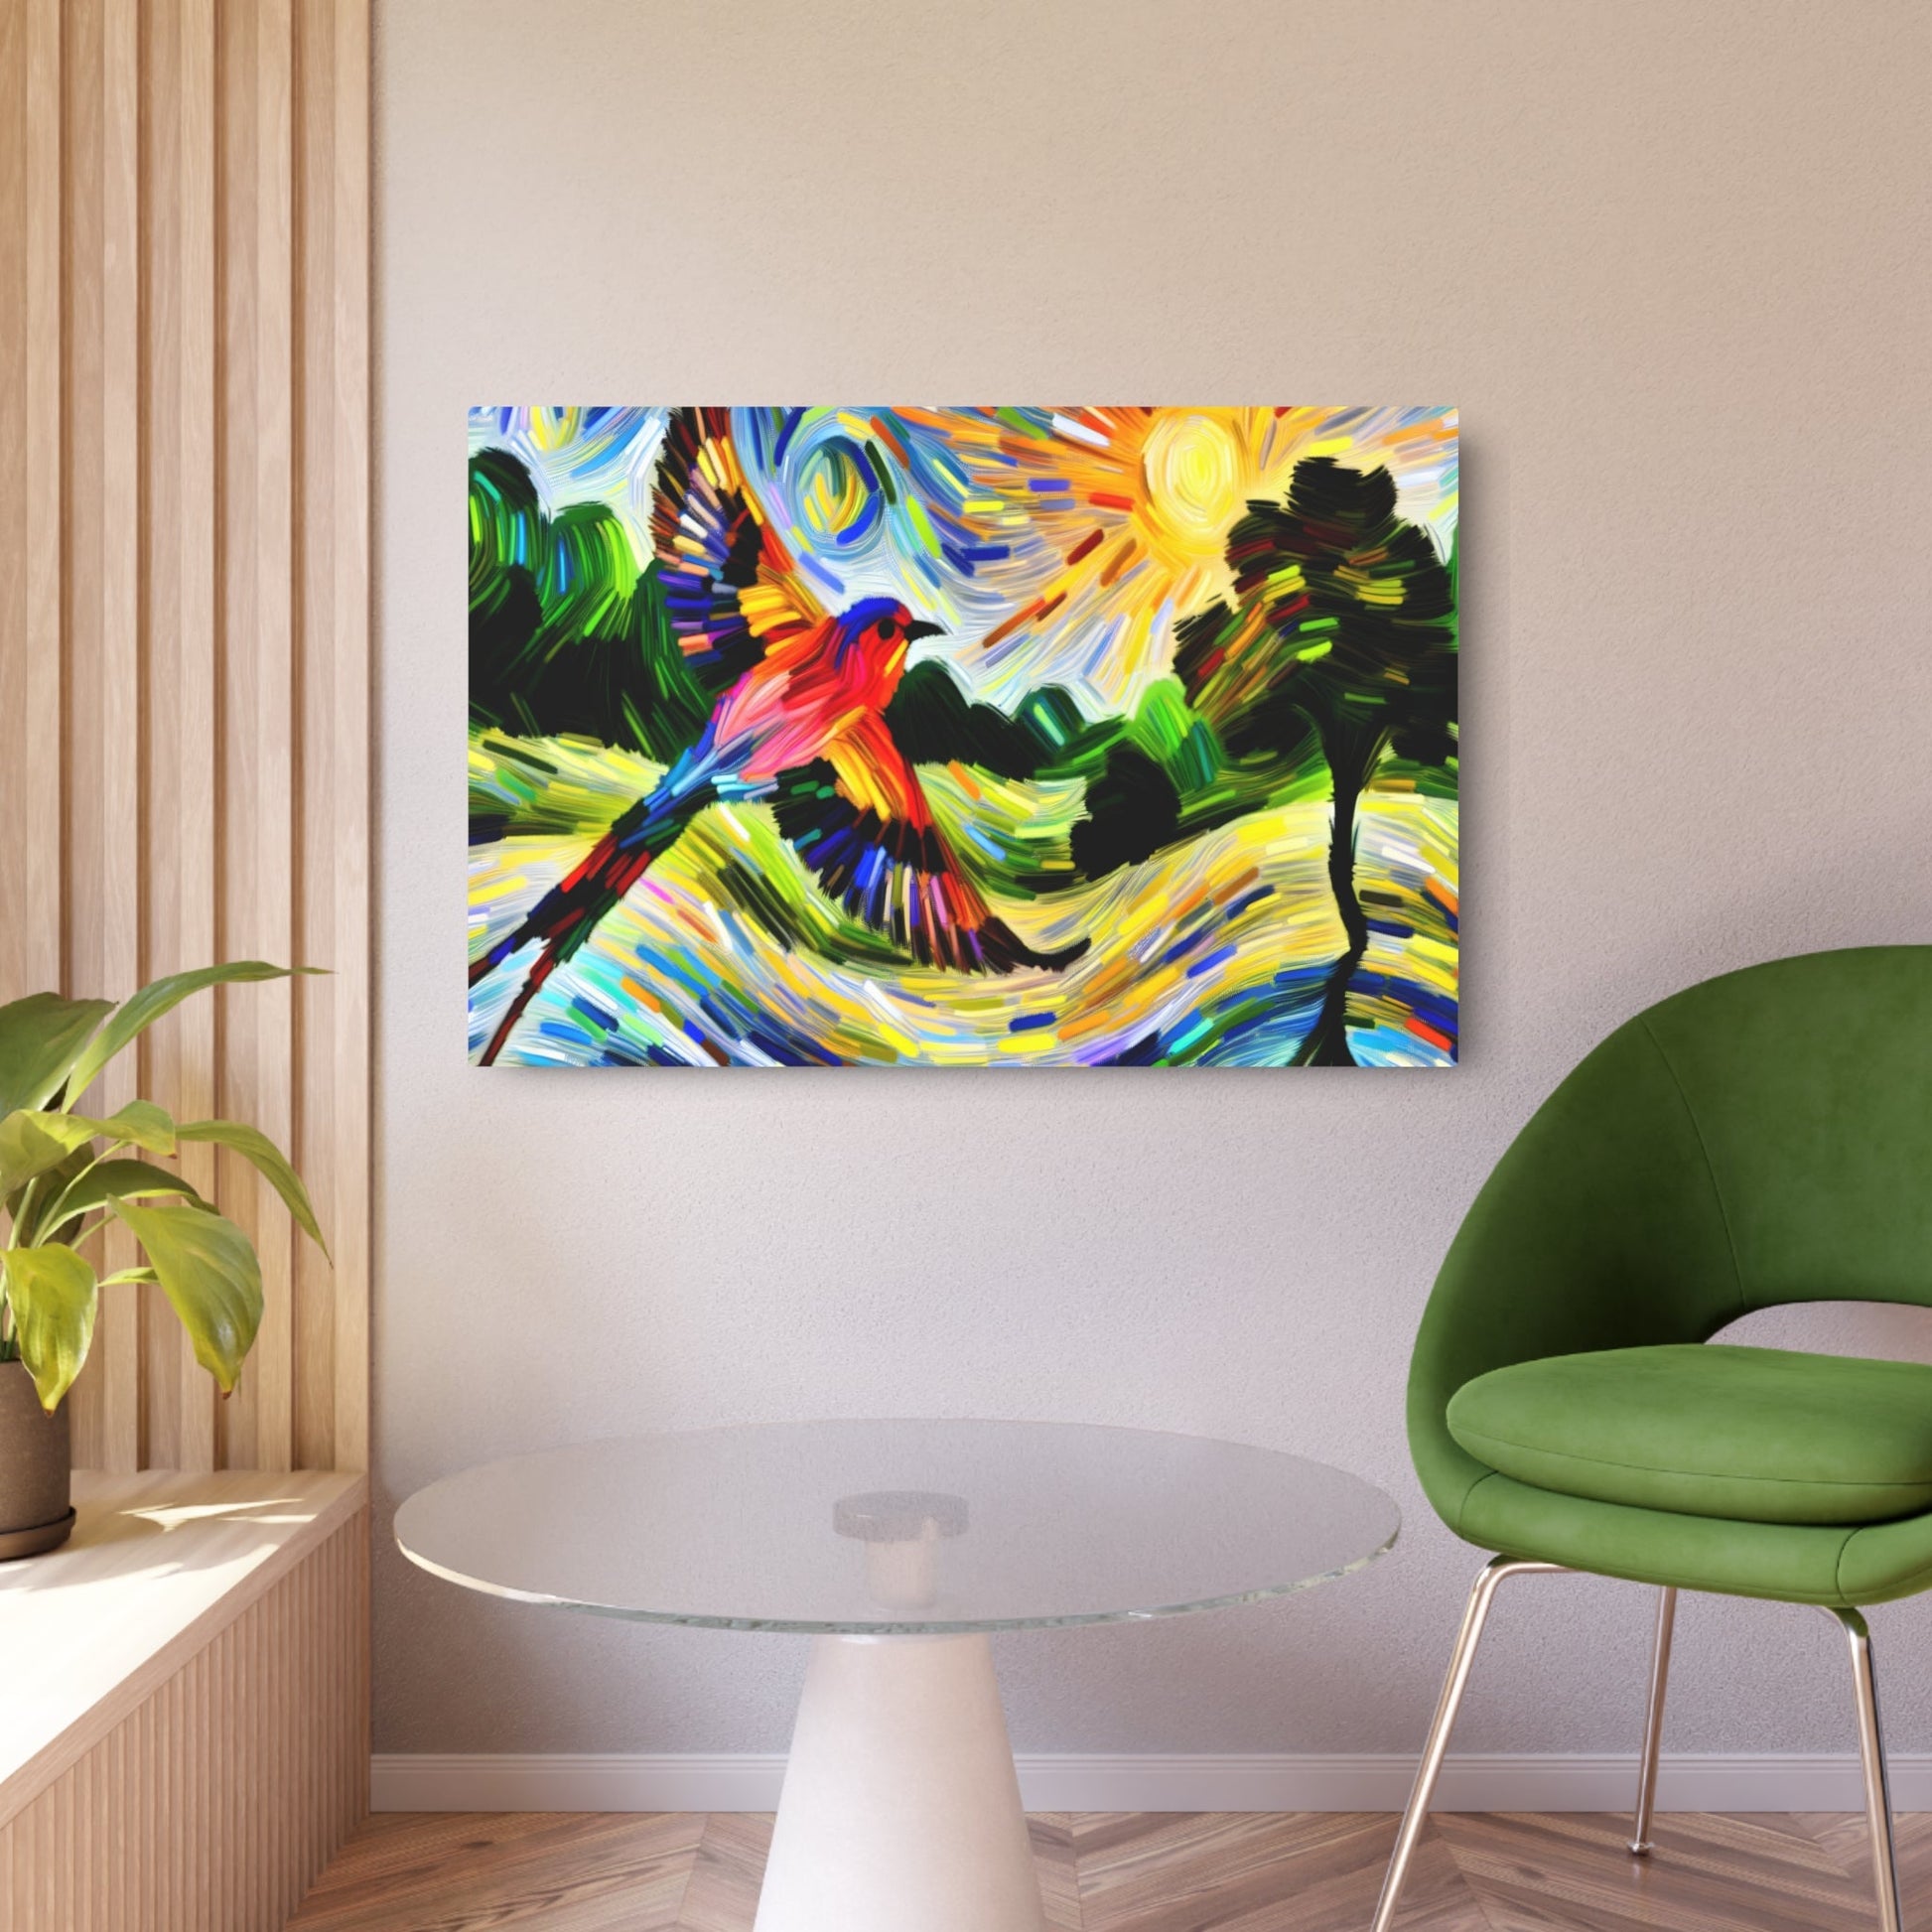 Metal Poster Art | "Impressionist Style Western Art - Vibrant Bird Flying Over Colorful Landscape, Detailed Featherwork and Lively Nature Elements" - Metal Poster Art 36″ x 24″ (Horizontal) 0.12''